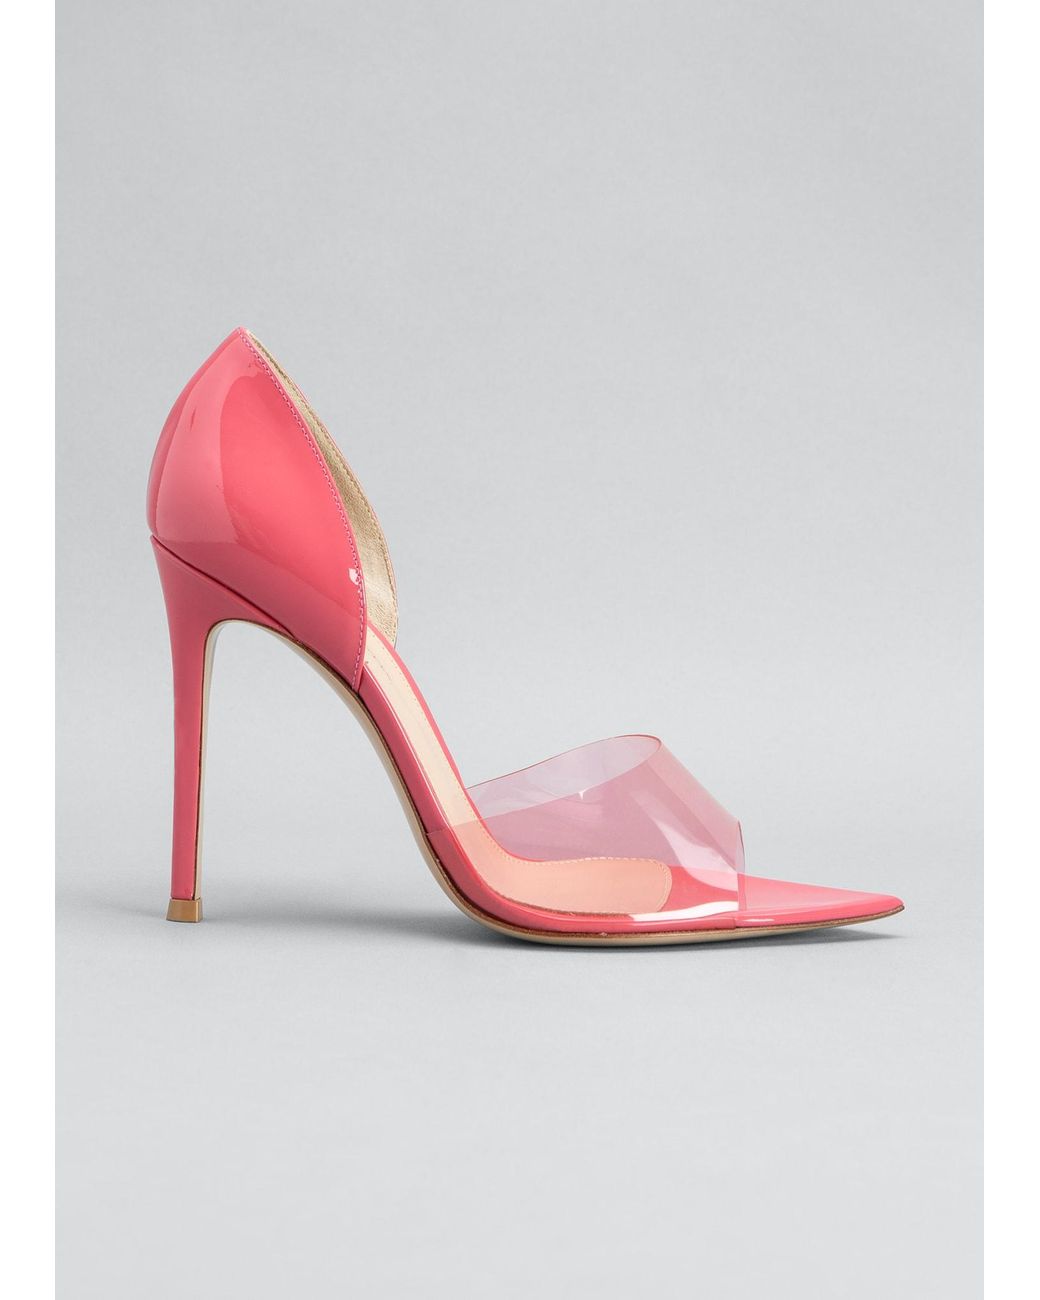 Pink Shoes | Pink Court Shoes & Sandals | Dorothy Perkins